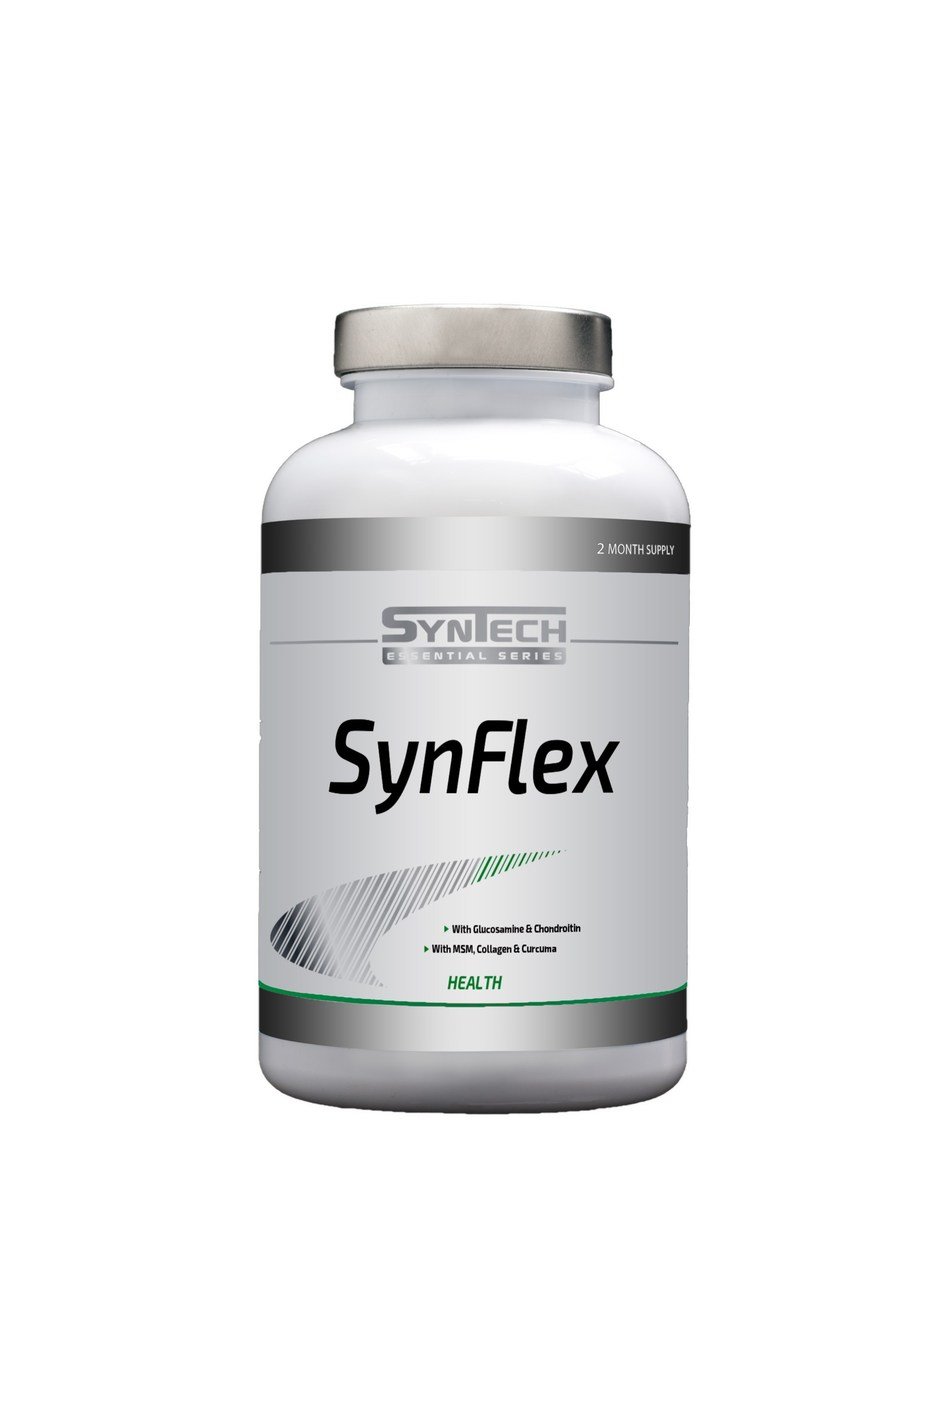 SynTech Nutrition’s SynFlex Gives Hope To Americans Suffering From Joint Pain